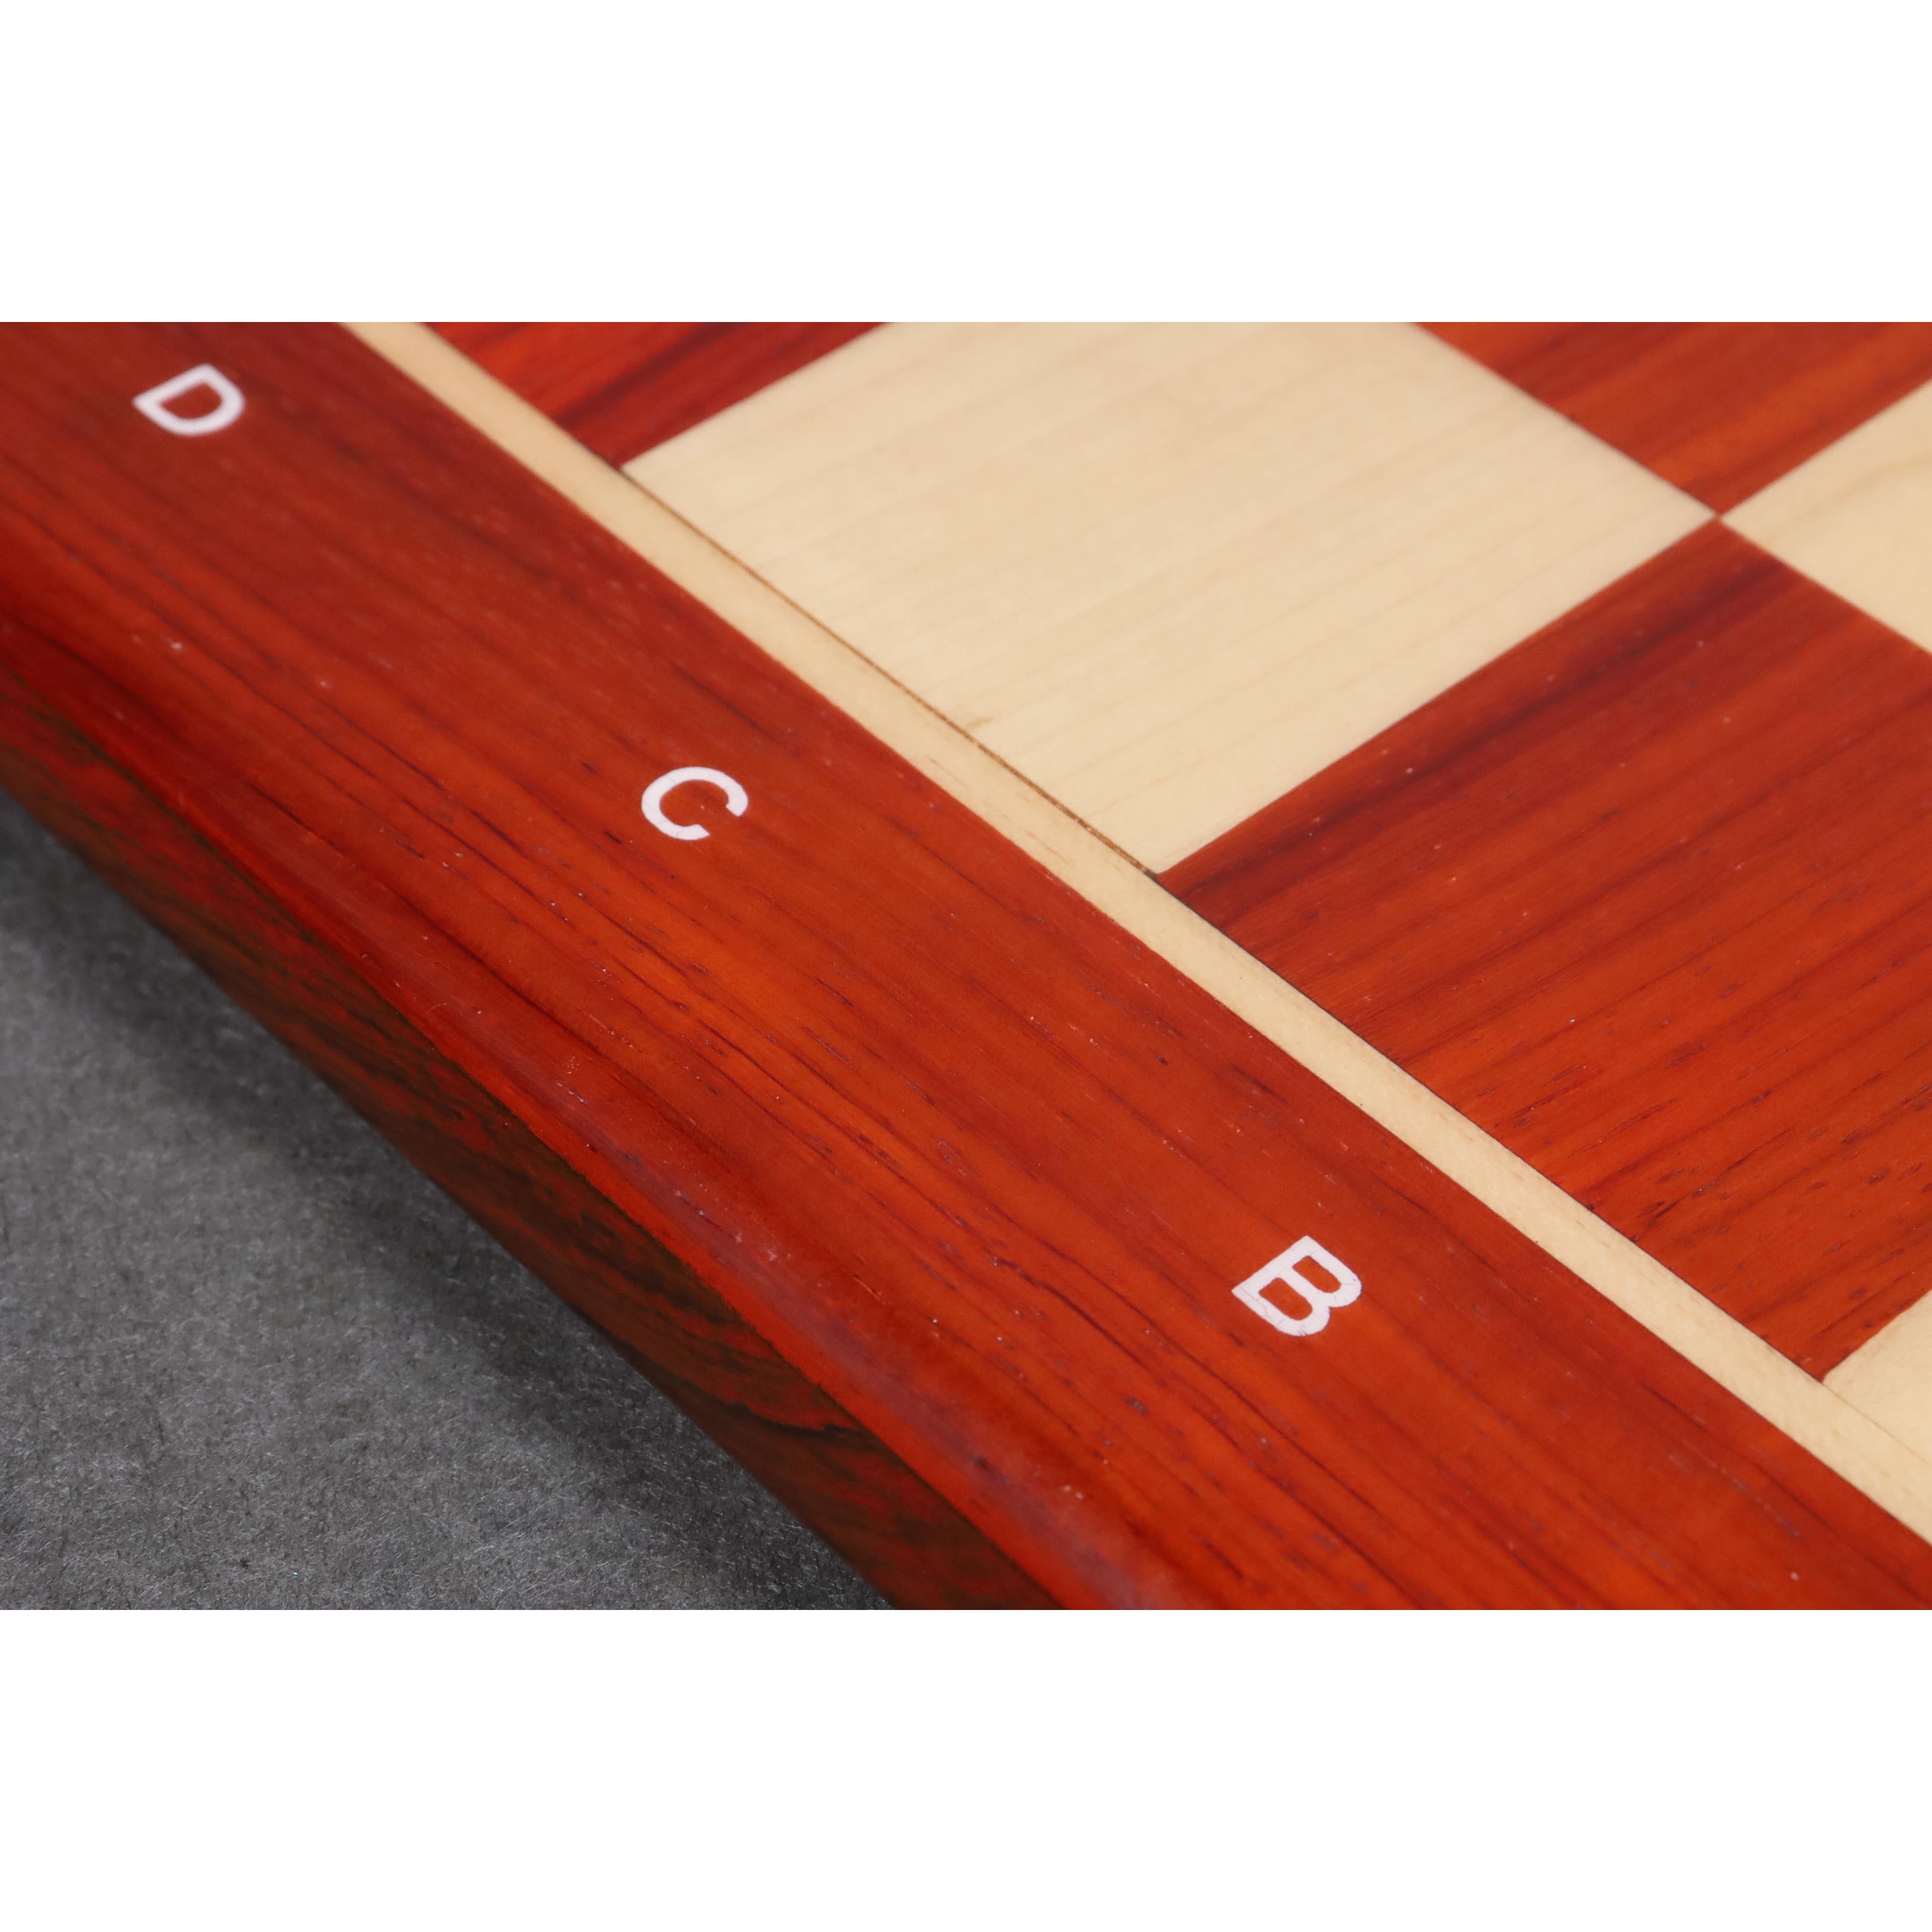 Solid Bud Rosewood and Maple- 55 mm square- Algebraic Notations